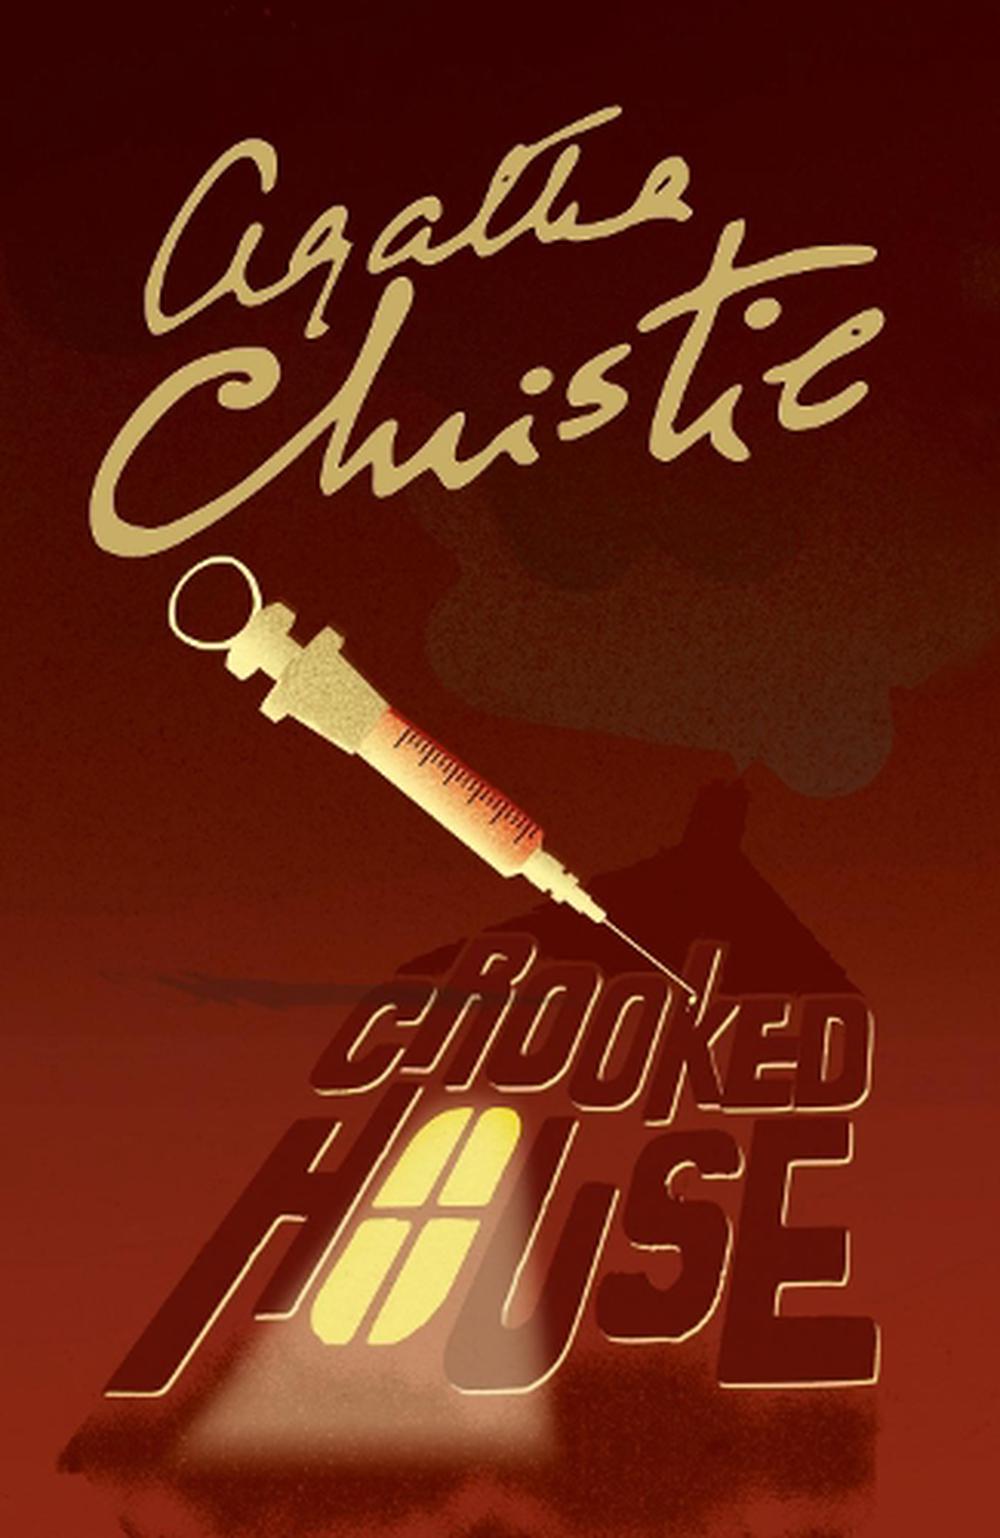 agatha christie crooked house